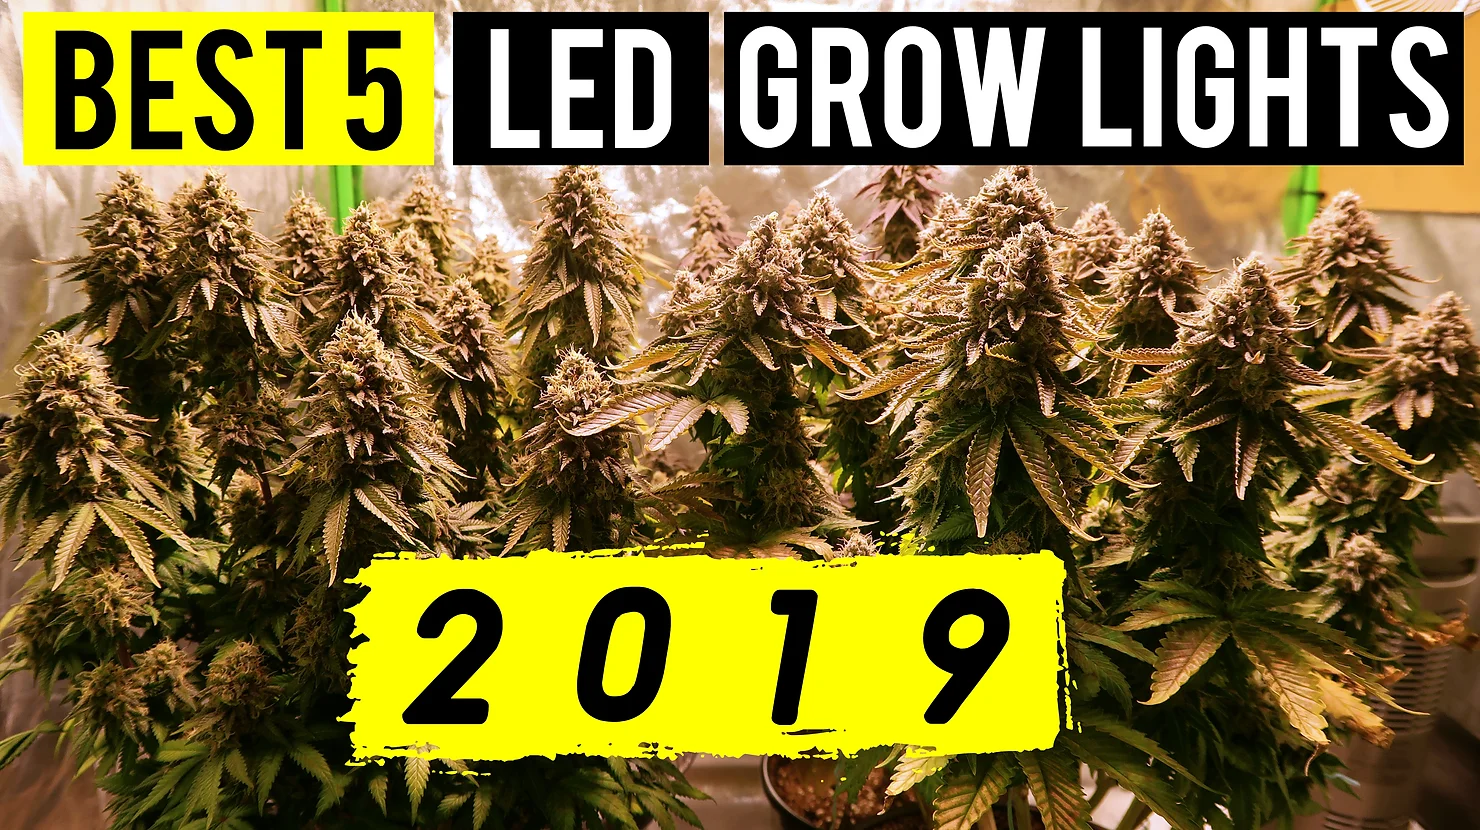 Best 5 LED Grow Lights 2019 | 5×5 Coverage Area